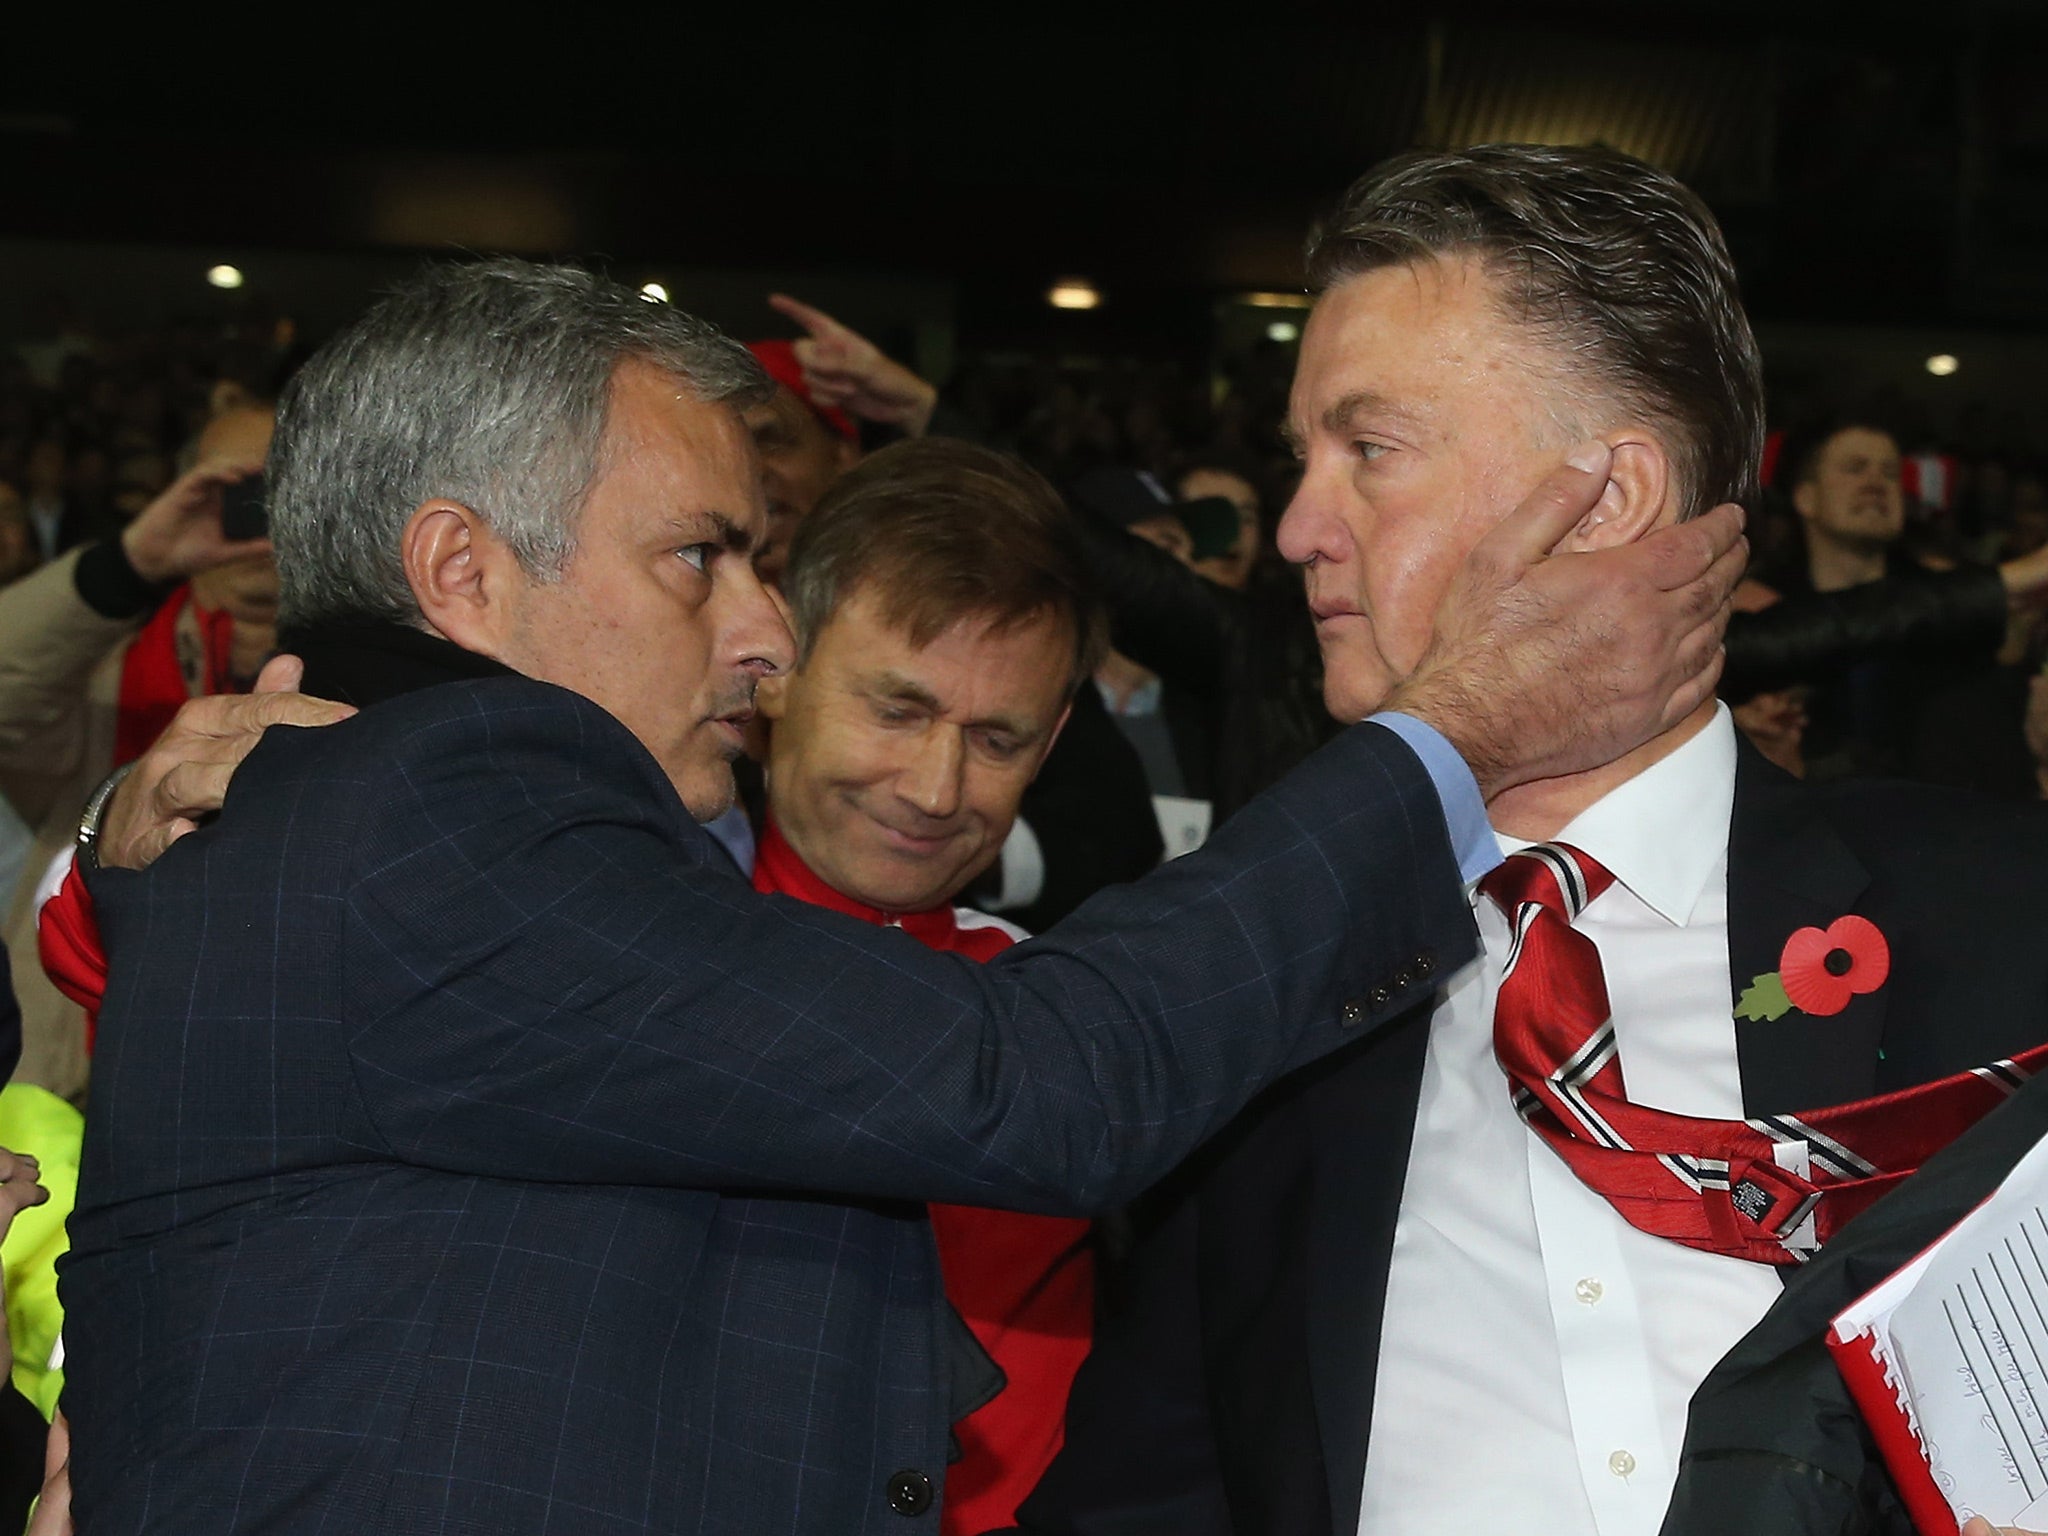 Jose Mourinho considers Louis van Gaal to be a friend and one-time mentor